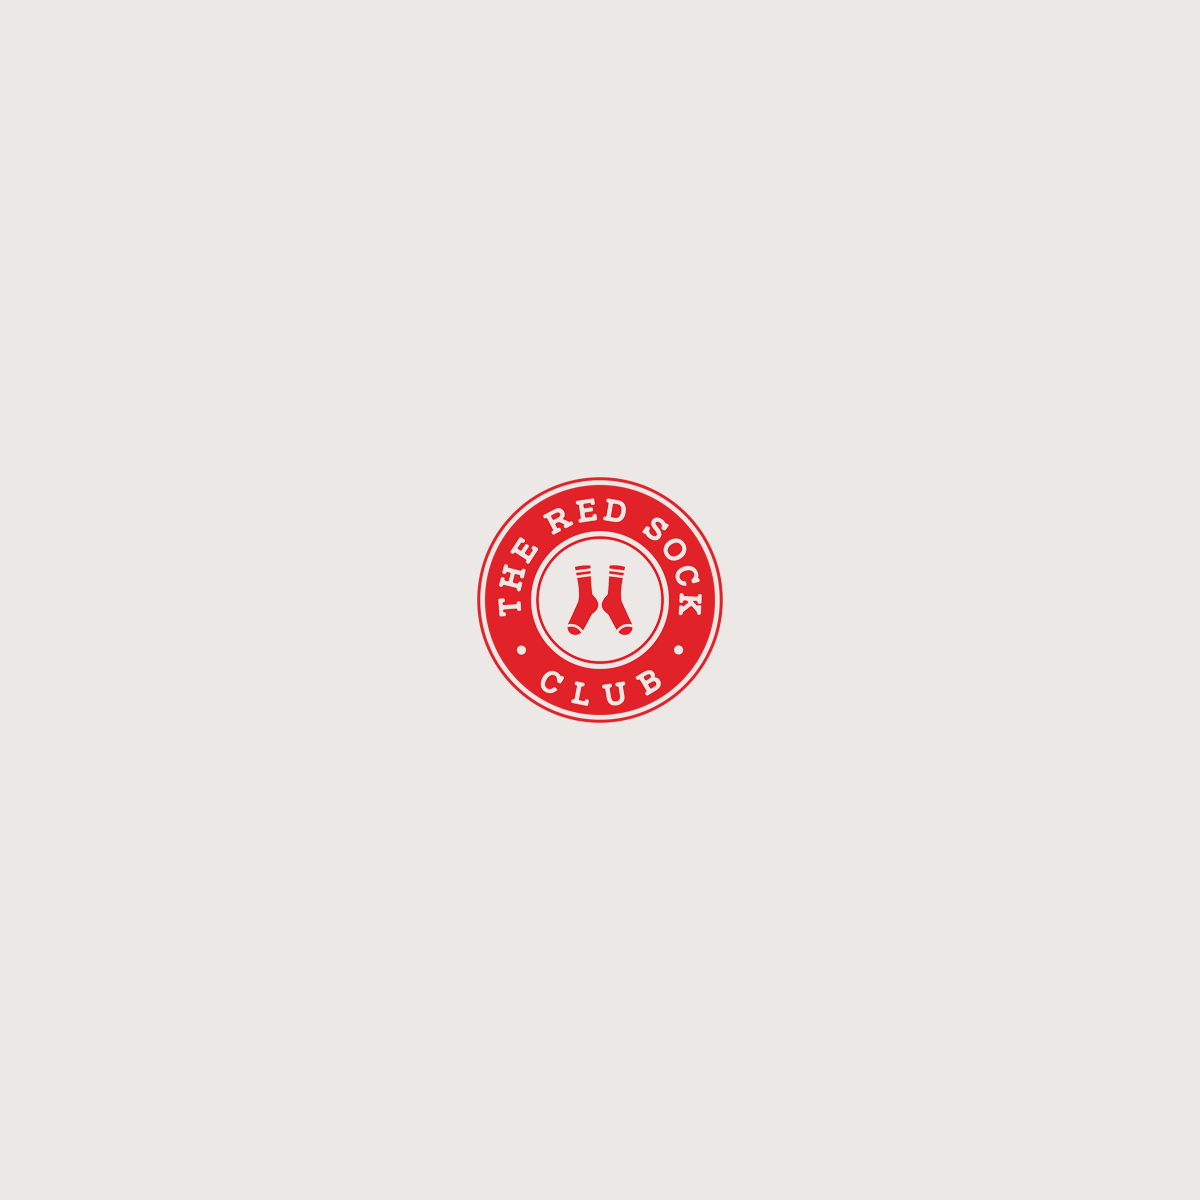 Red Clothing Logo - Bold, Modern, Clothing Logo Design for THE RED SOCK CLUB by F!or ...